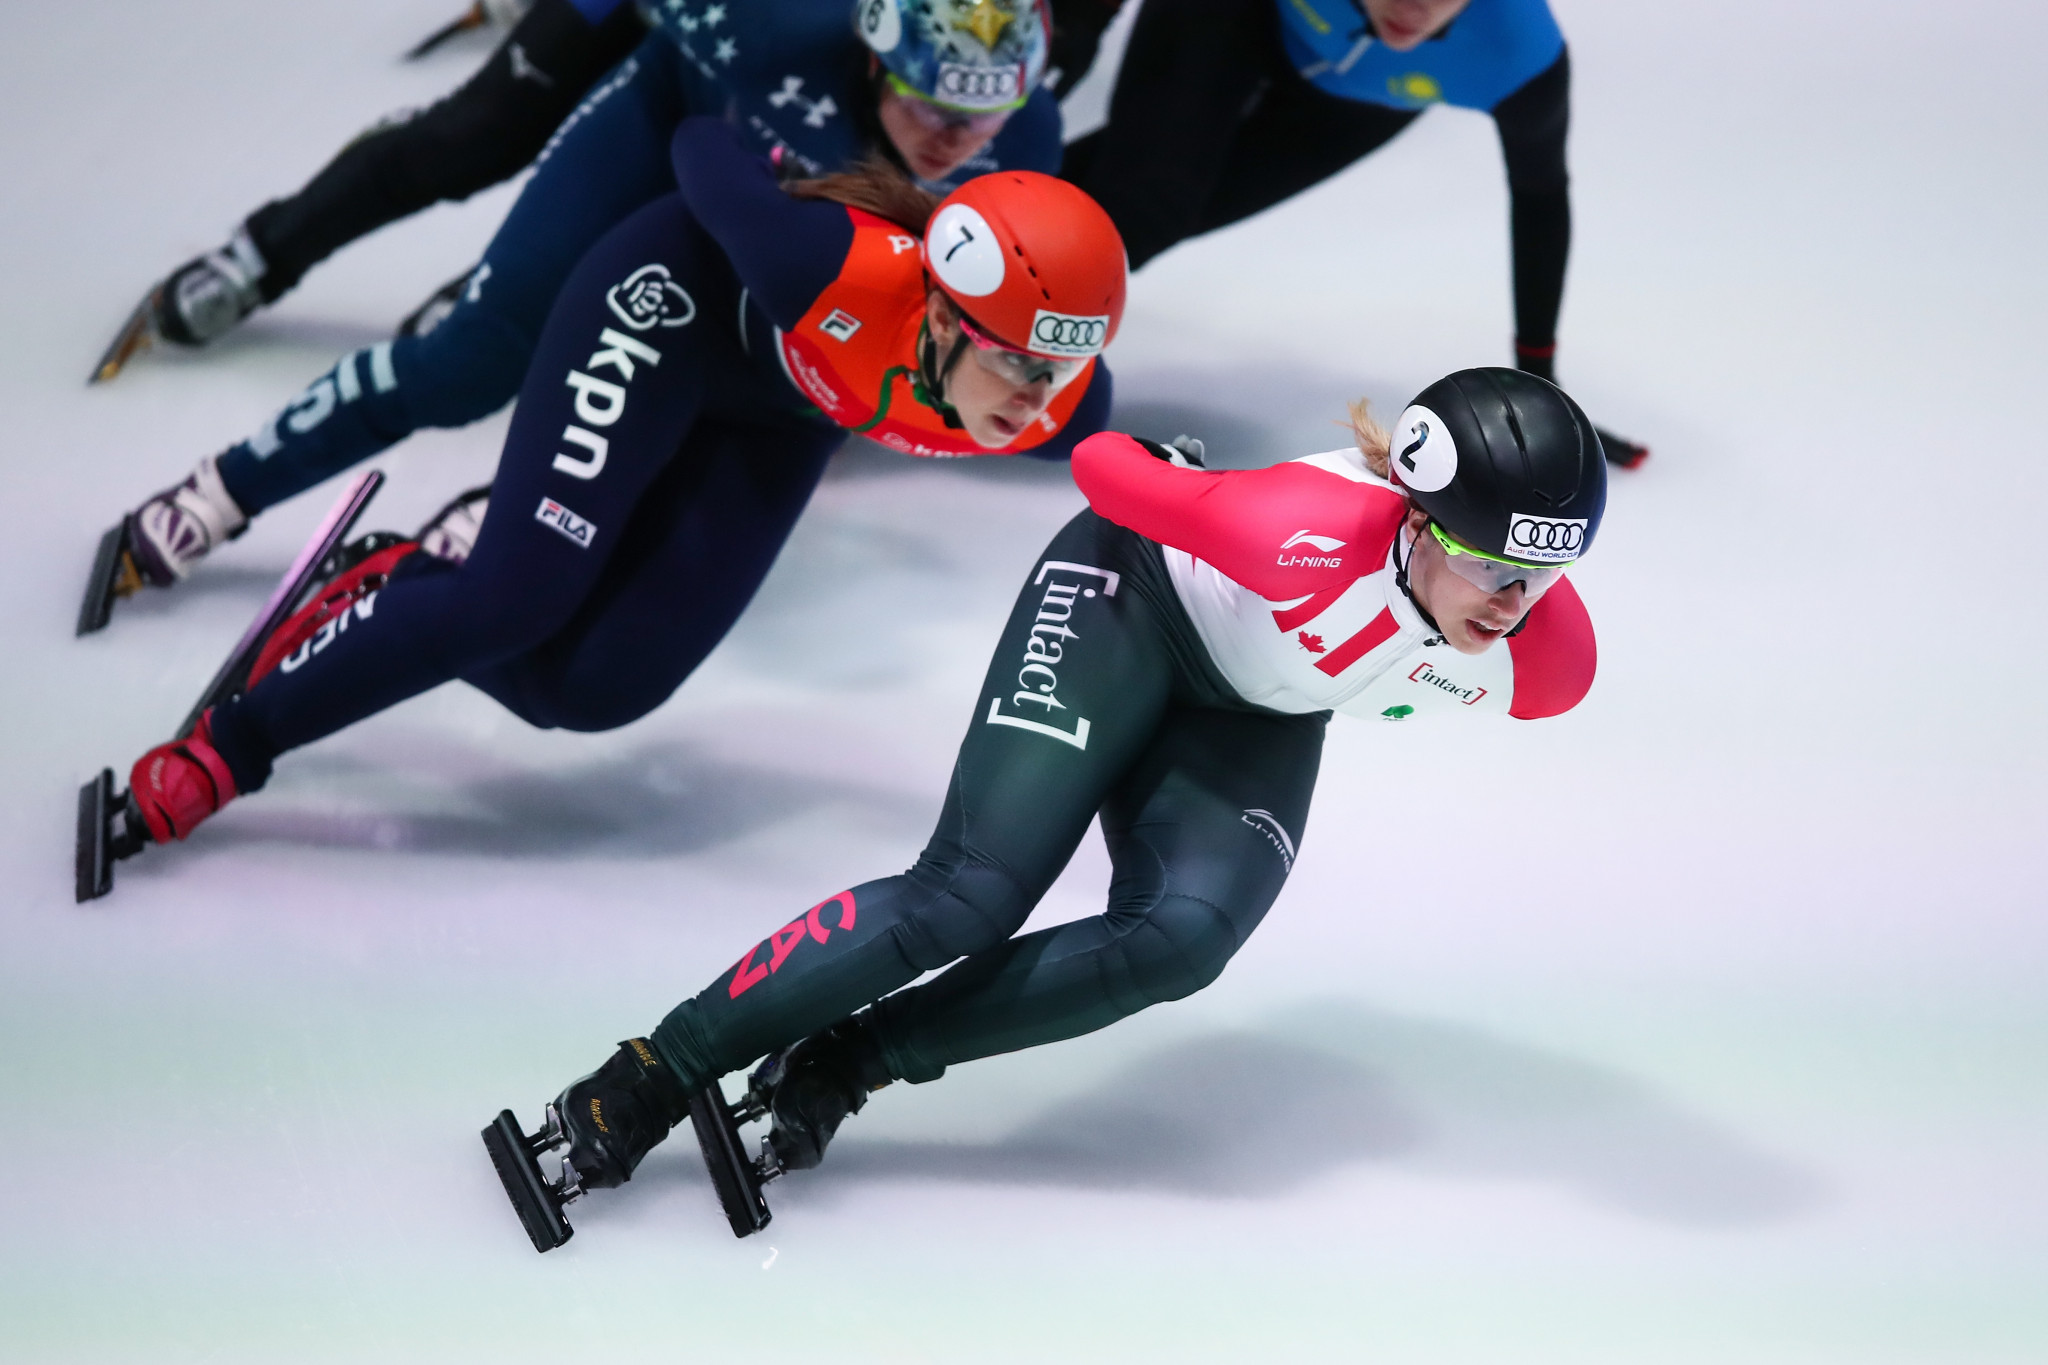 Pyeongchang 2018 qualification battle to resume at ISU Short Track World Cup in Shanghai